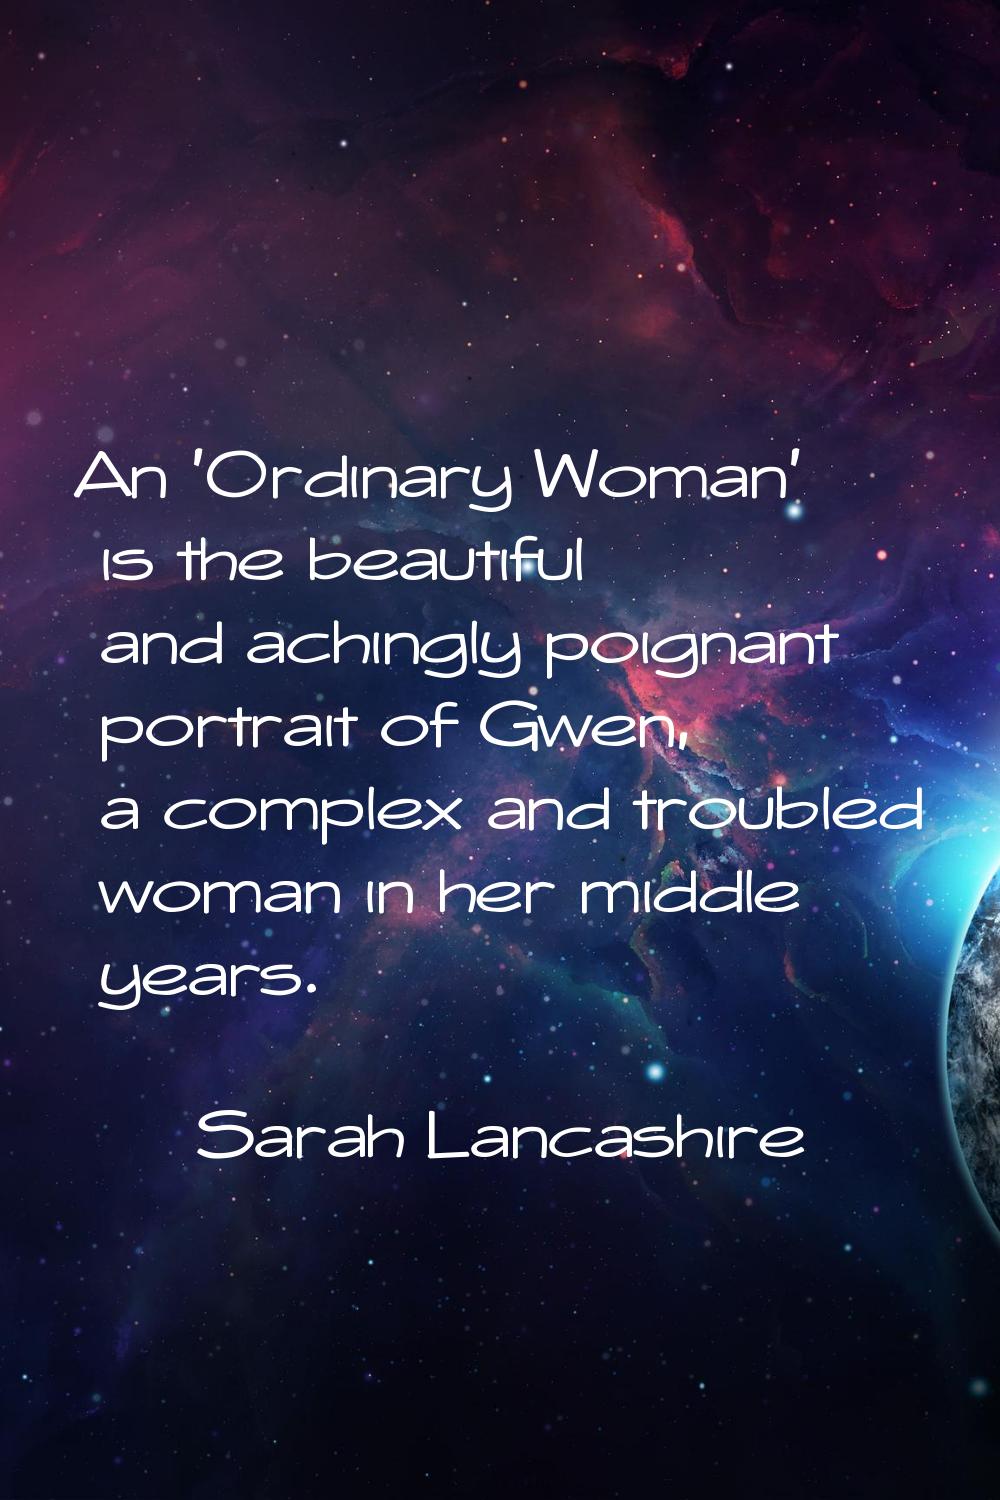 An 'Ordinary Woman' is the beautiful and achingly poignant portrait of Gwen, a complex and troubled